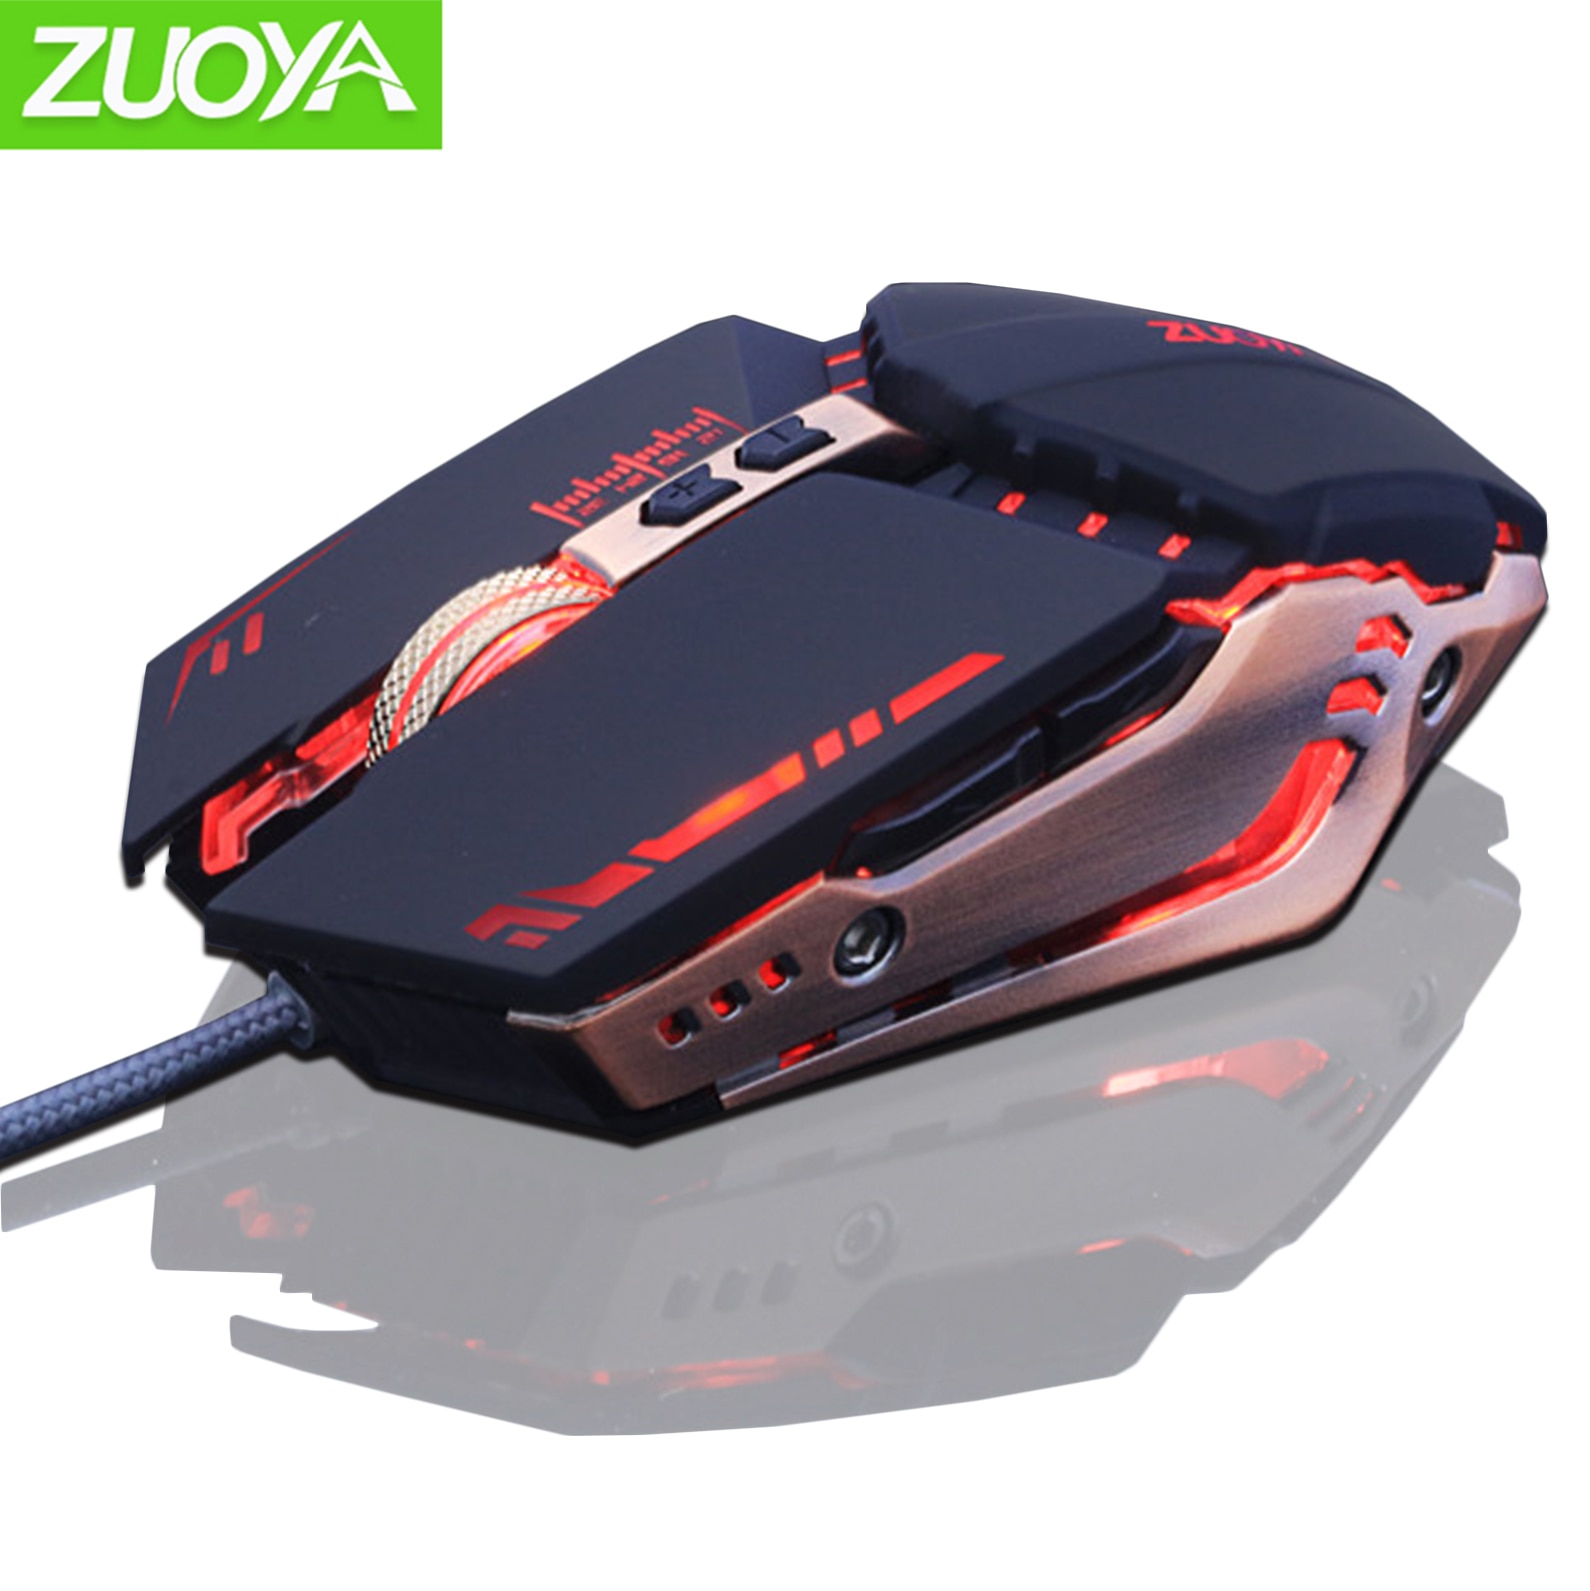 Zuoya Usb Wired Gaming Mouse 7 Knoppen Optische Led Computer Game Muizen Voor Pc Laptop Notebook Gamer